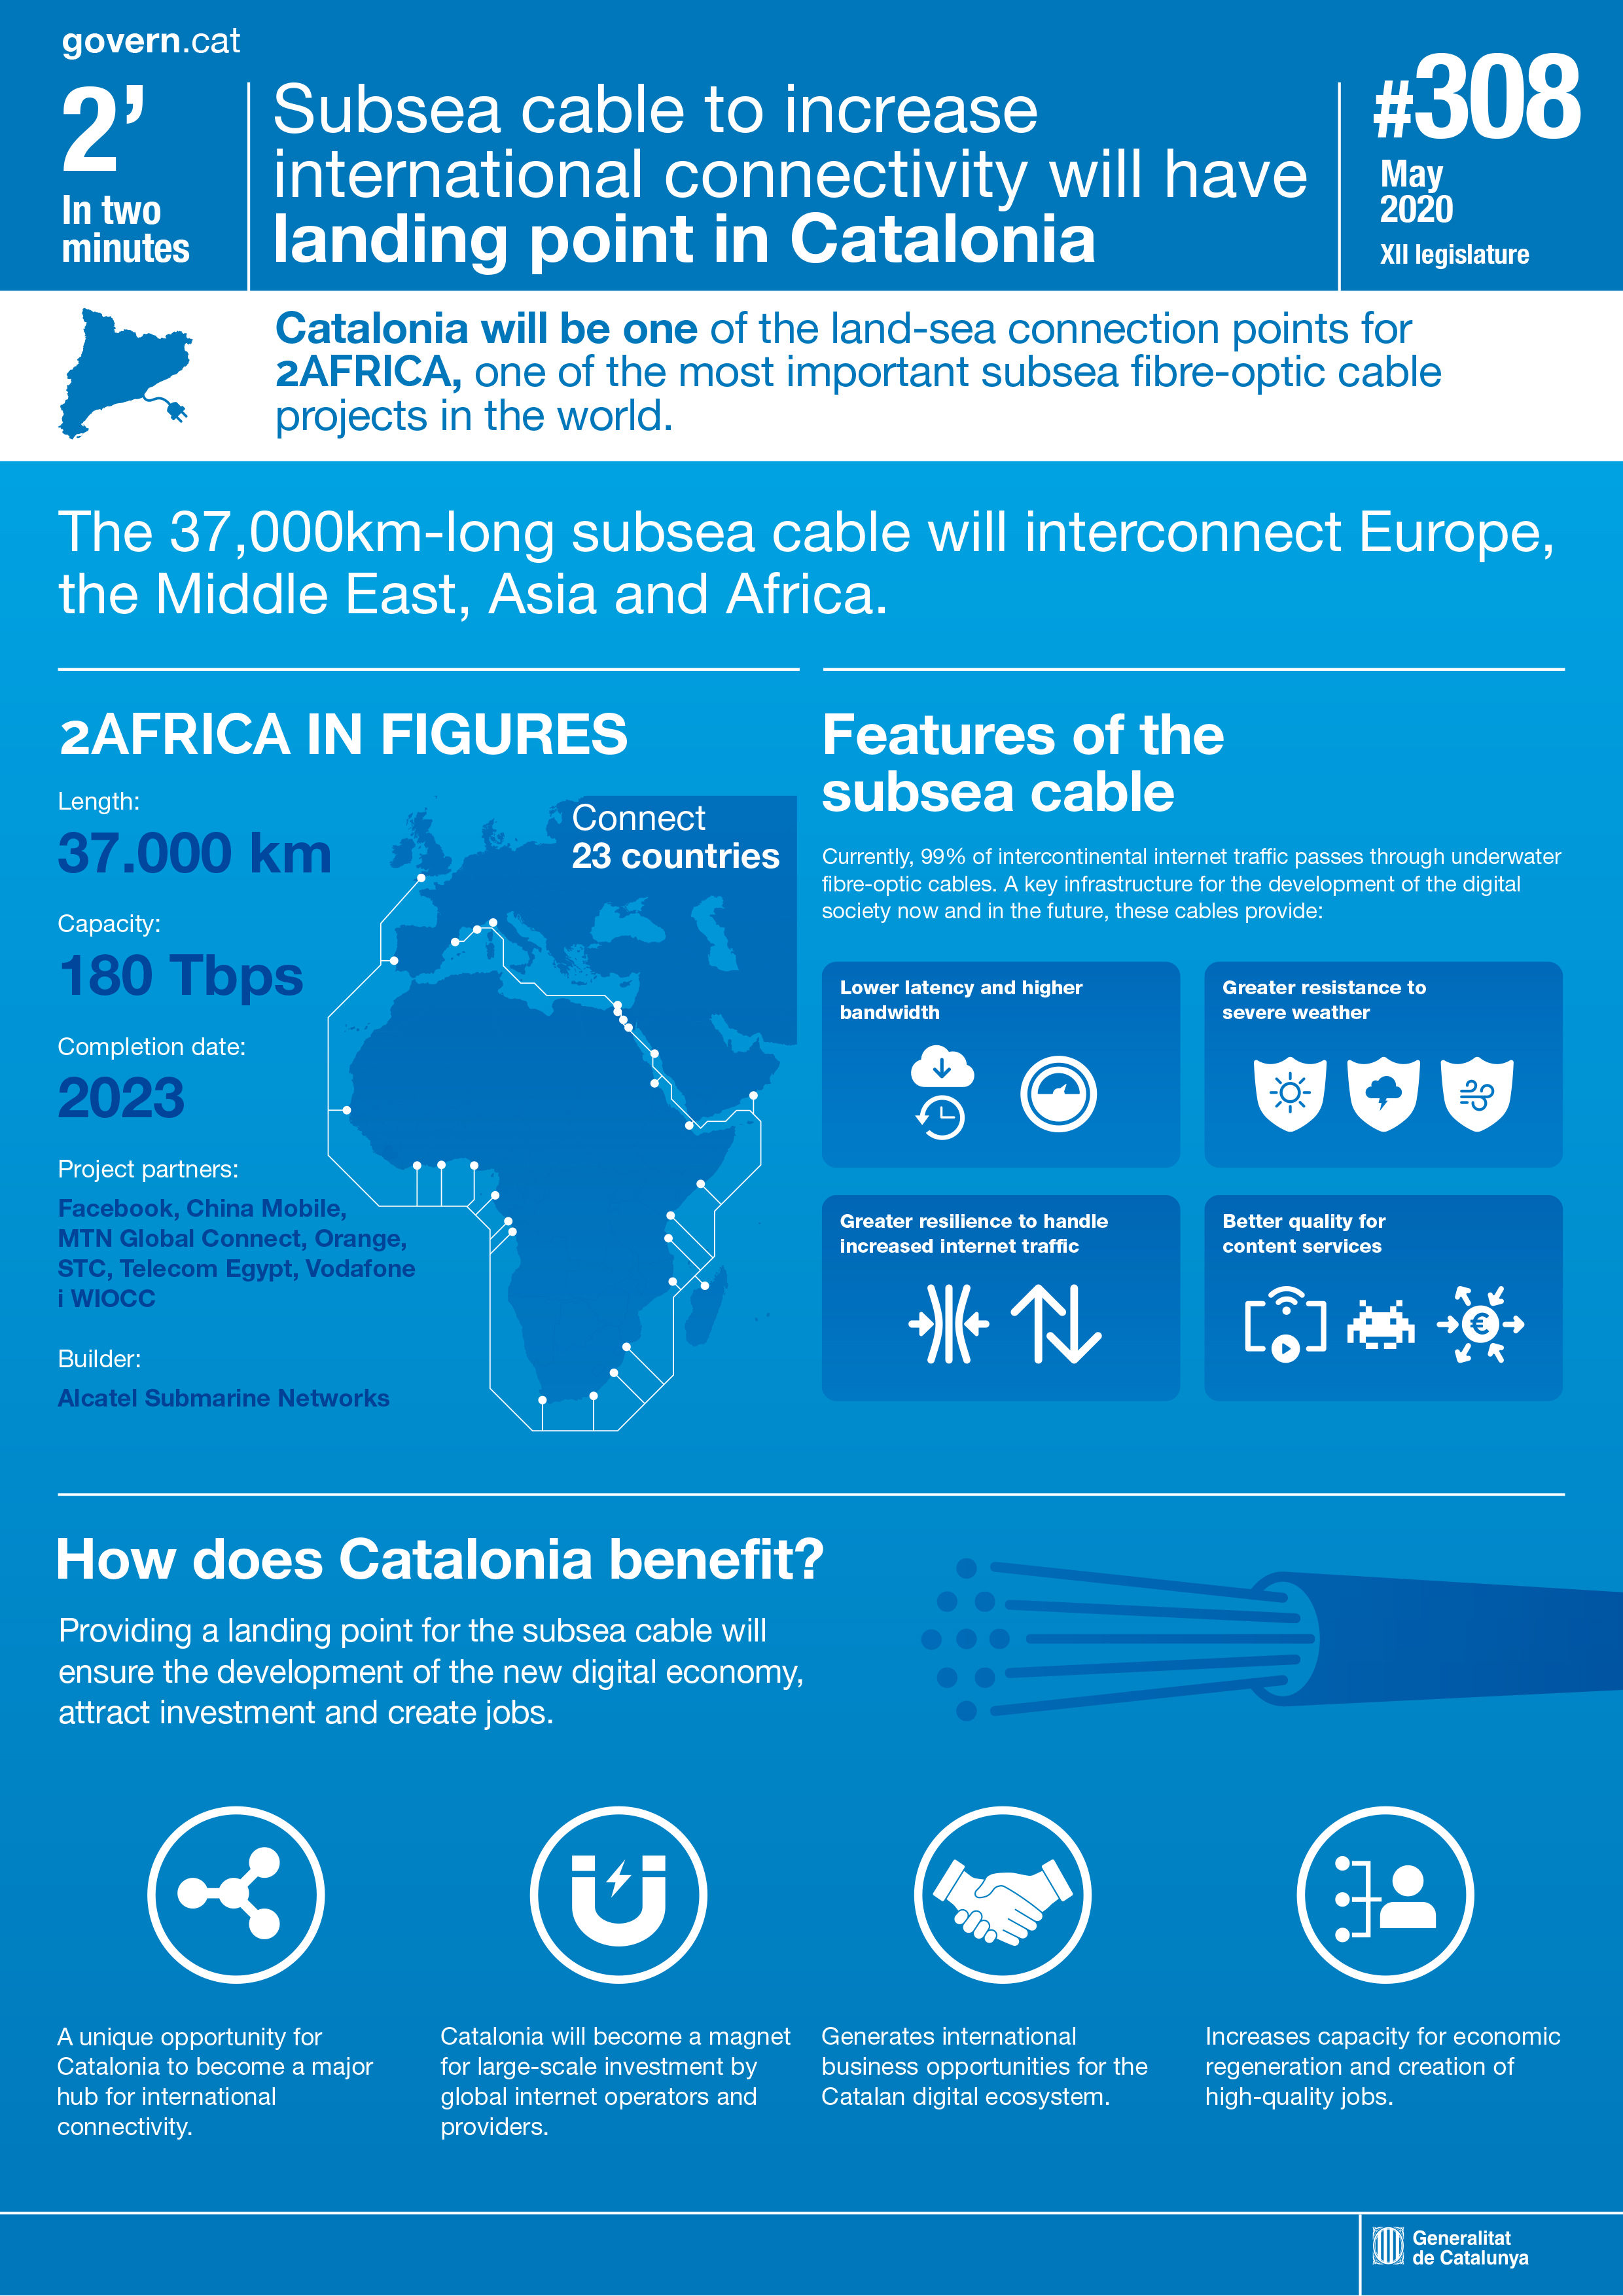 Catalonia will be one of the land-sea connection points for 2AFRICA, one of the most important subsea fibre-optic cable projects in the world.